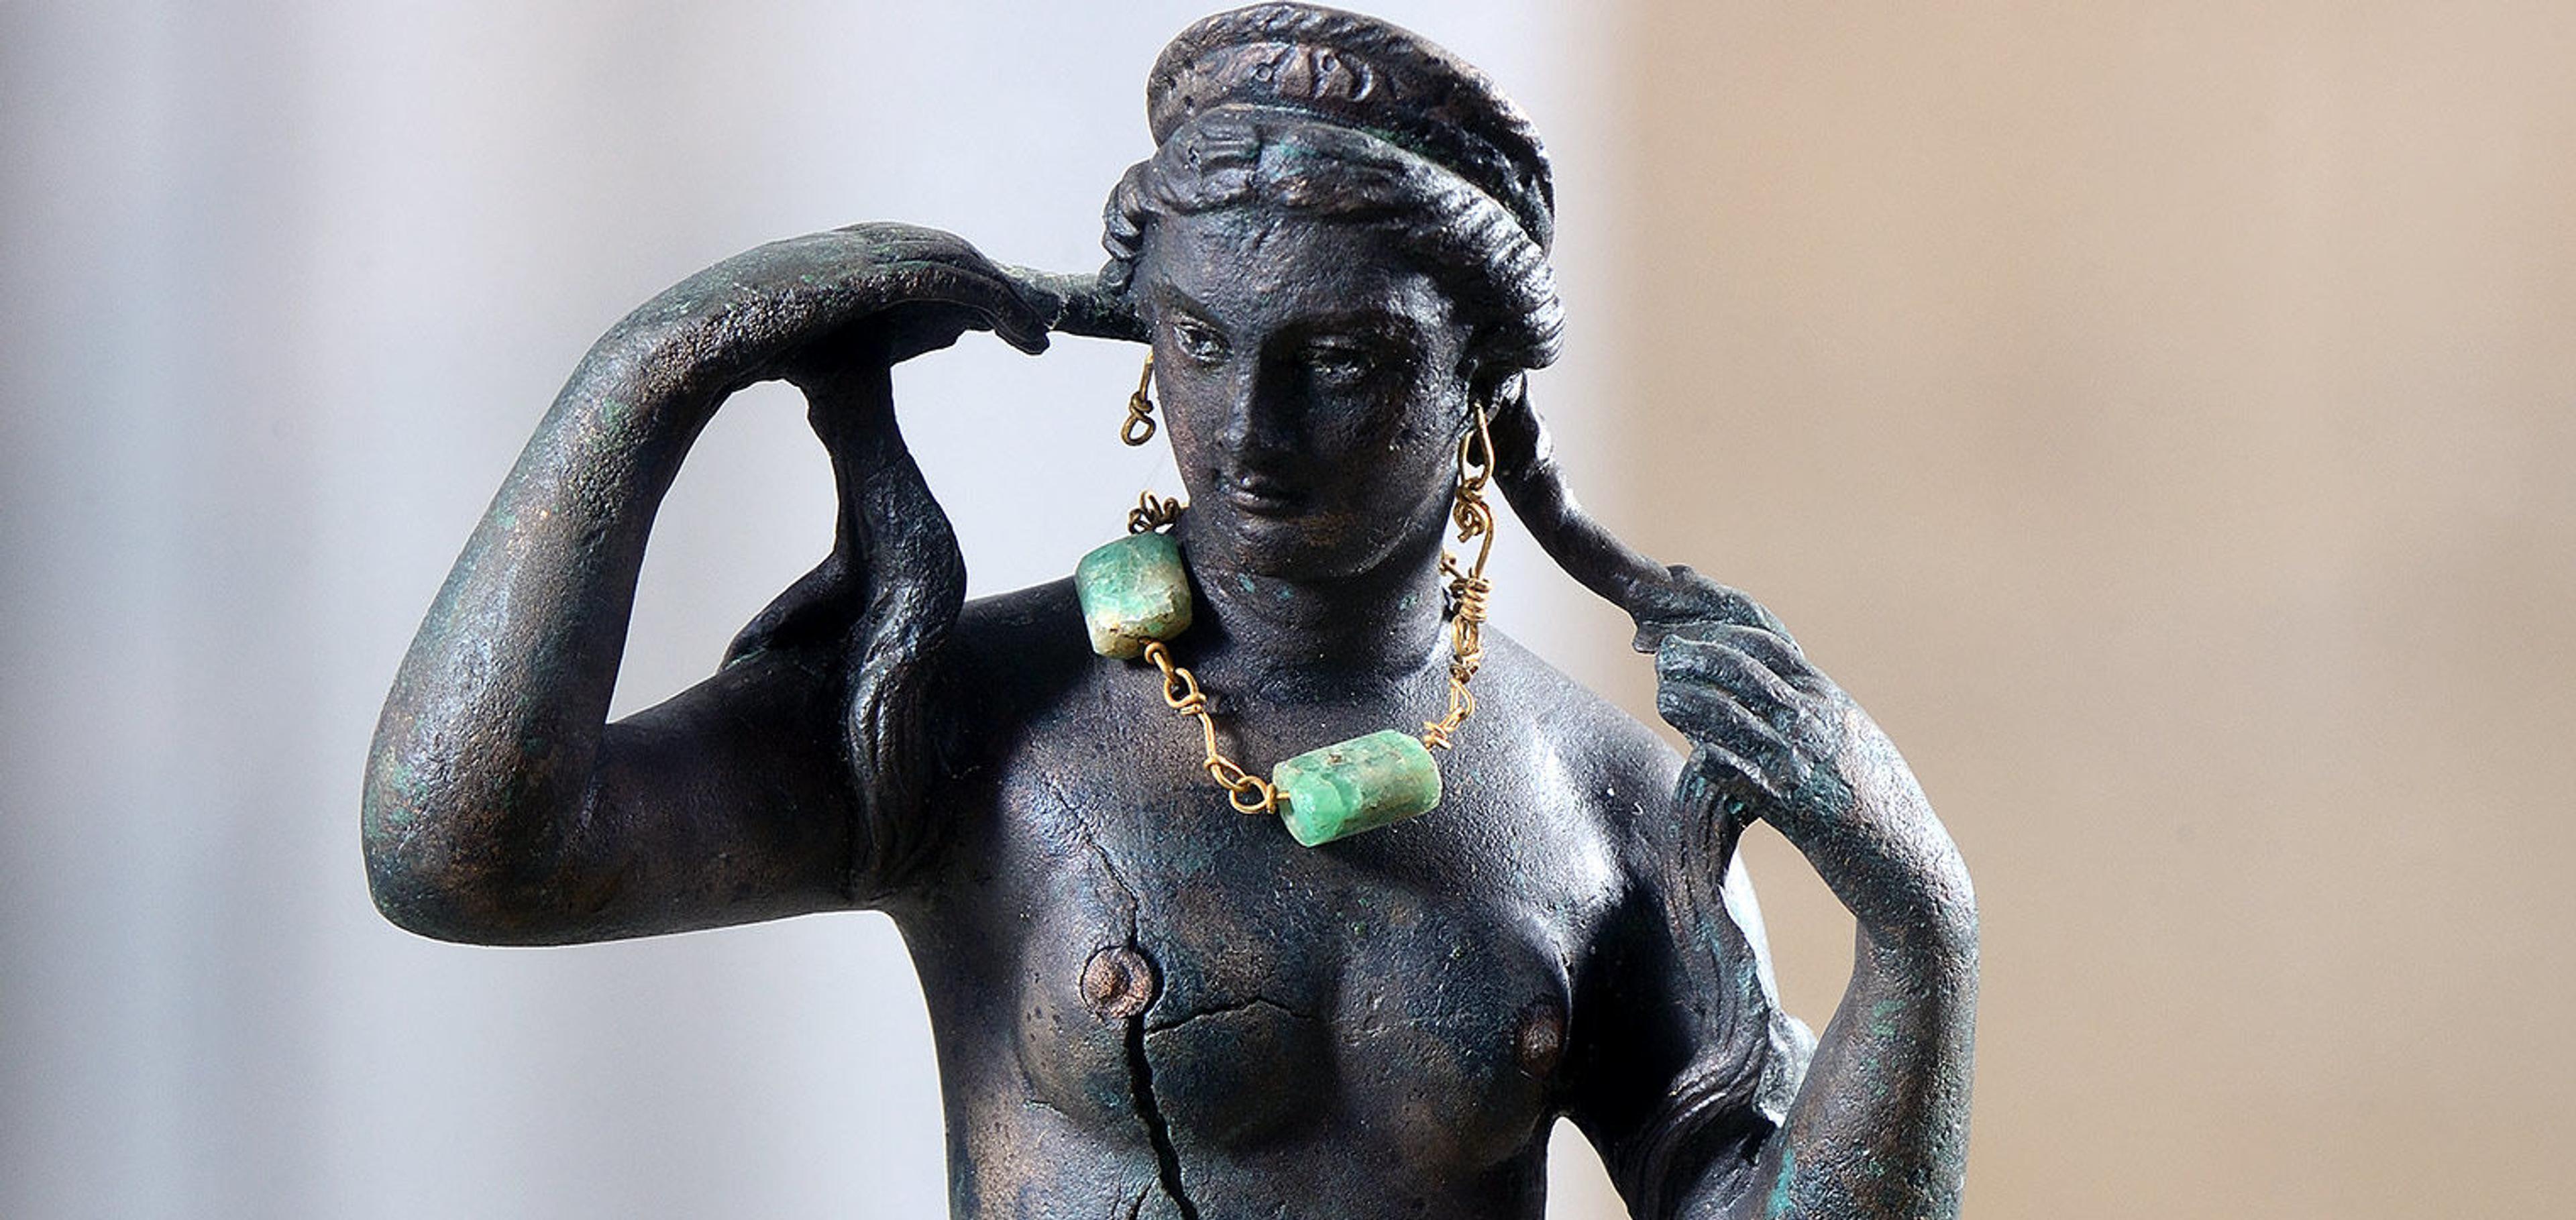 Detail of Aphrodite figurine holding her wet braids in her hands and wearing a green emerald necklace